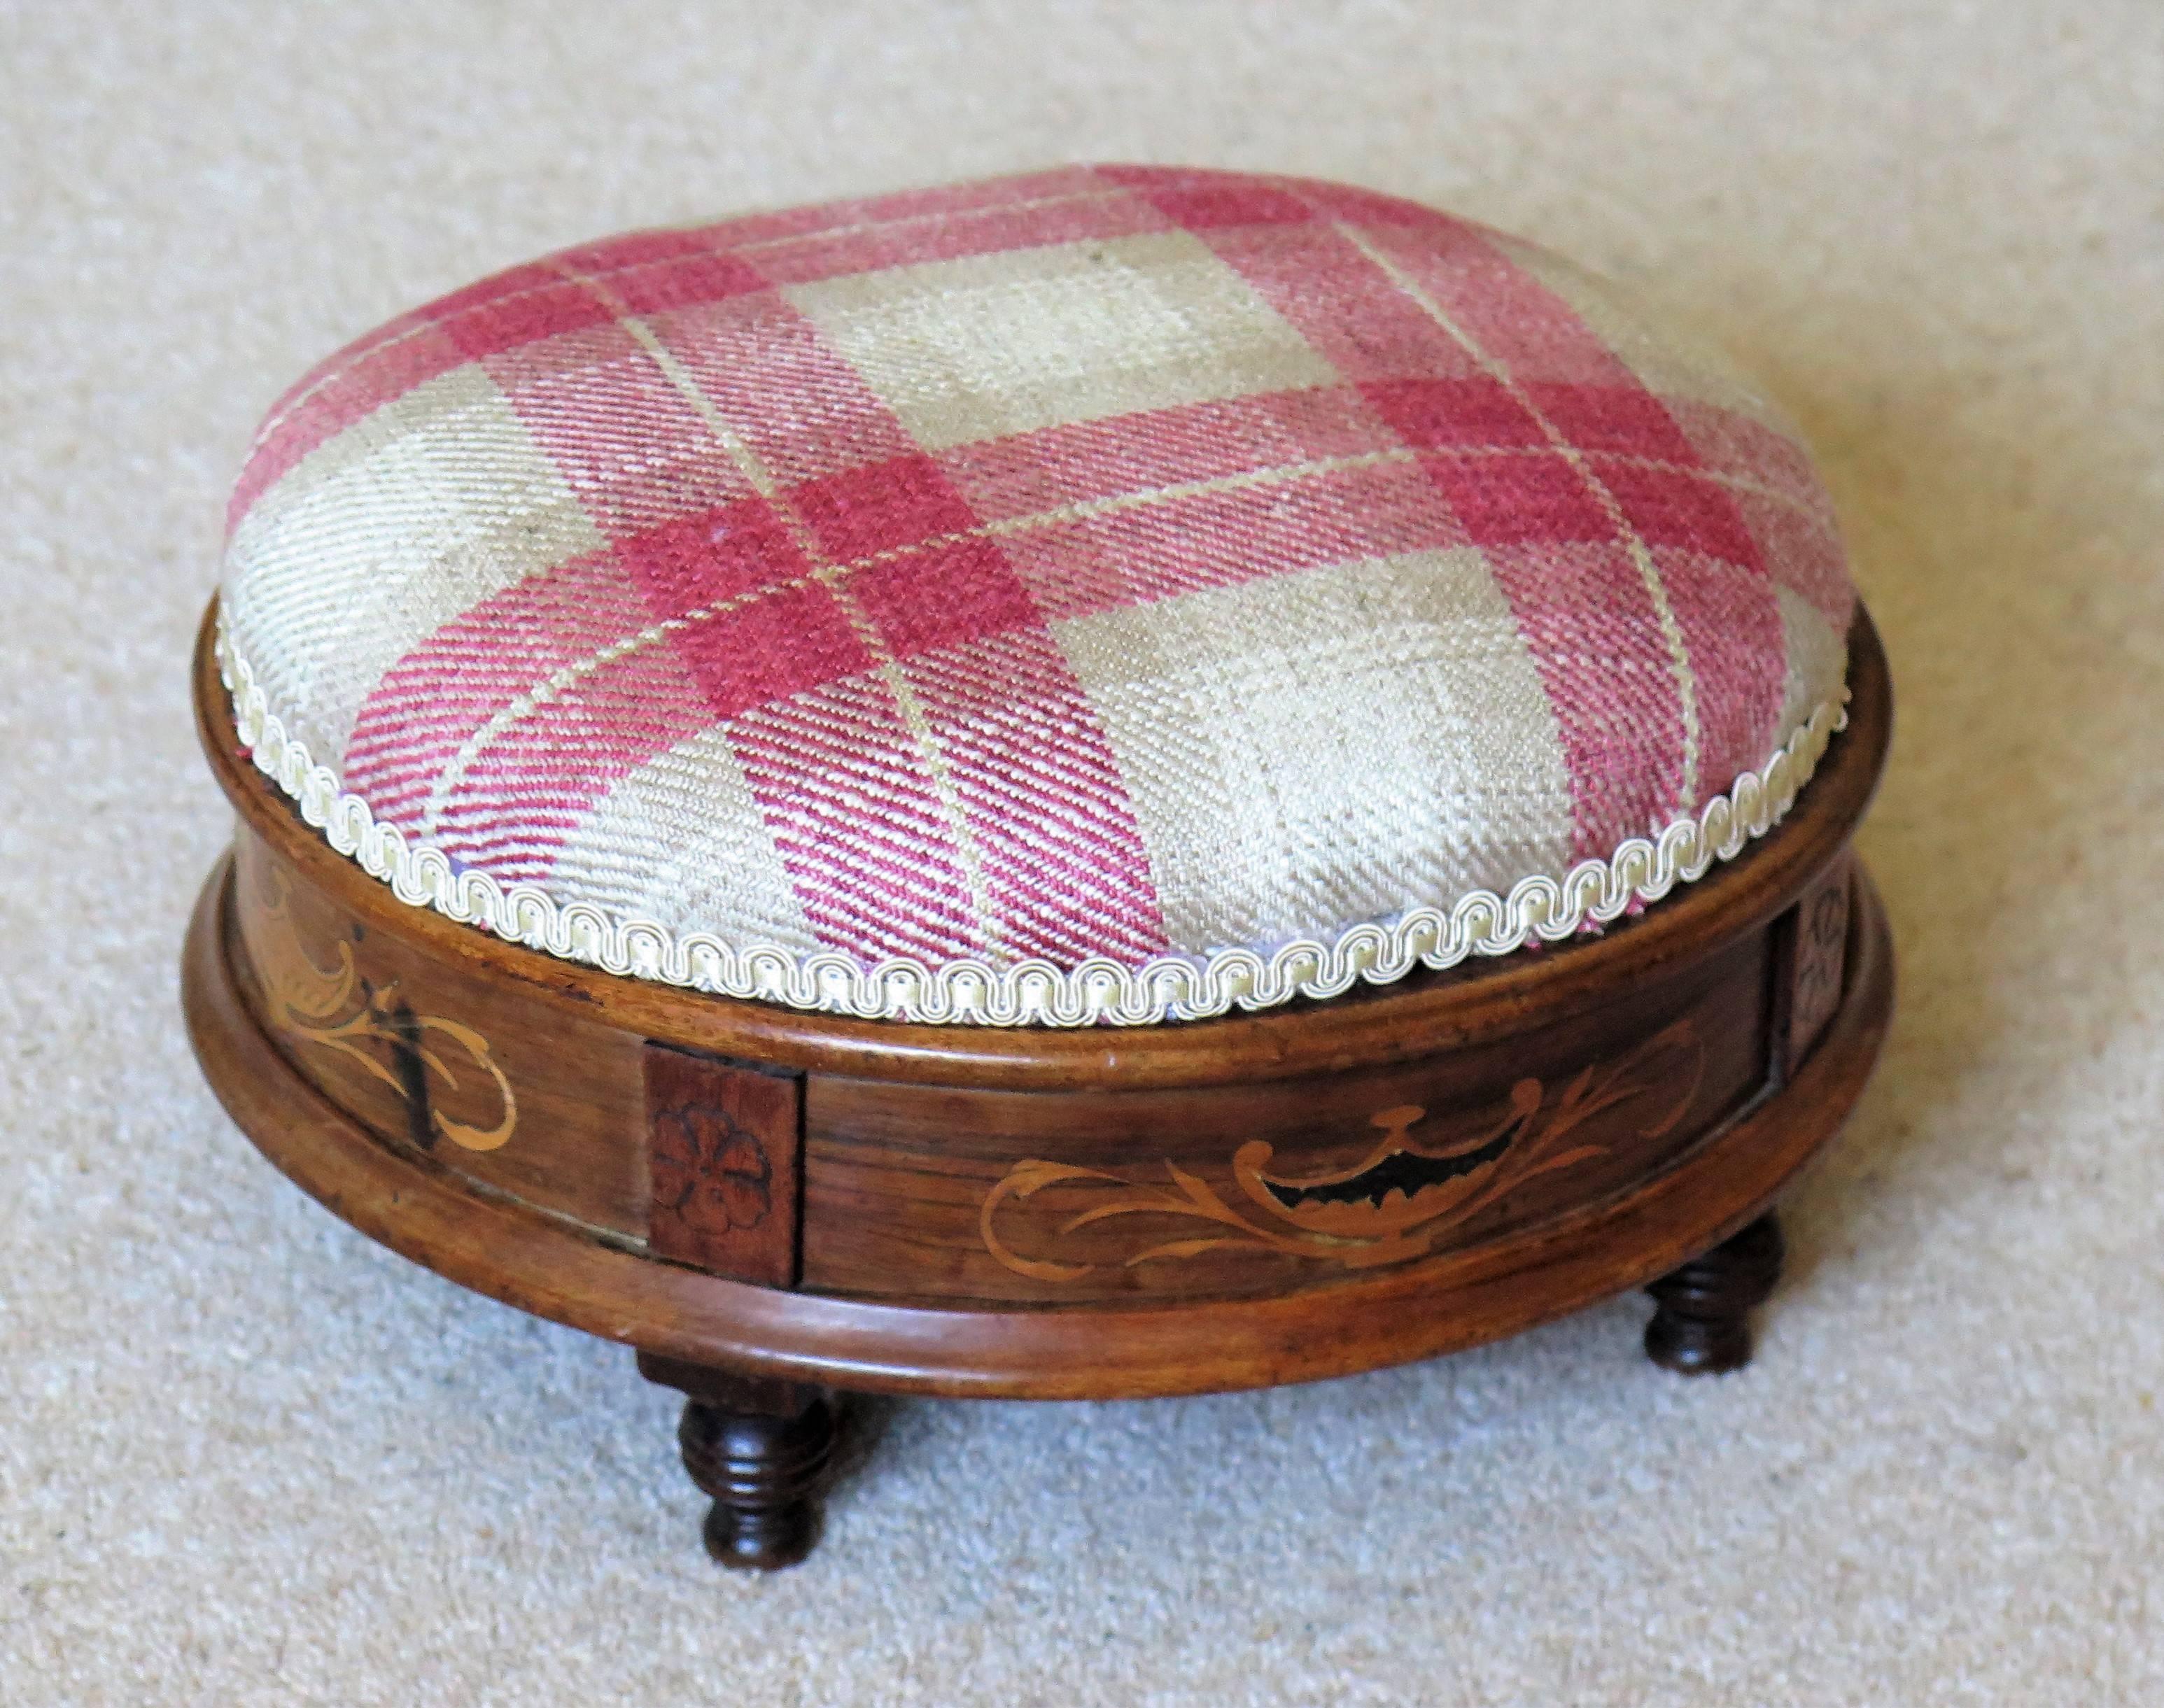 19th Century Early Victorian Foot Stool Walnut with Marquetry Inlay Re-Upholstered circa 1845